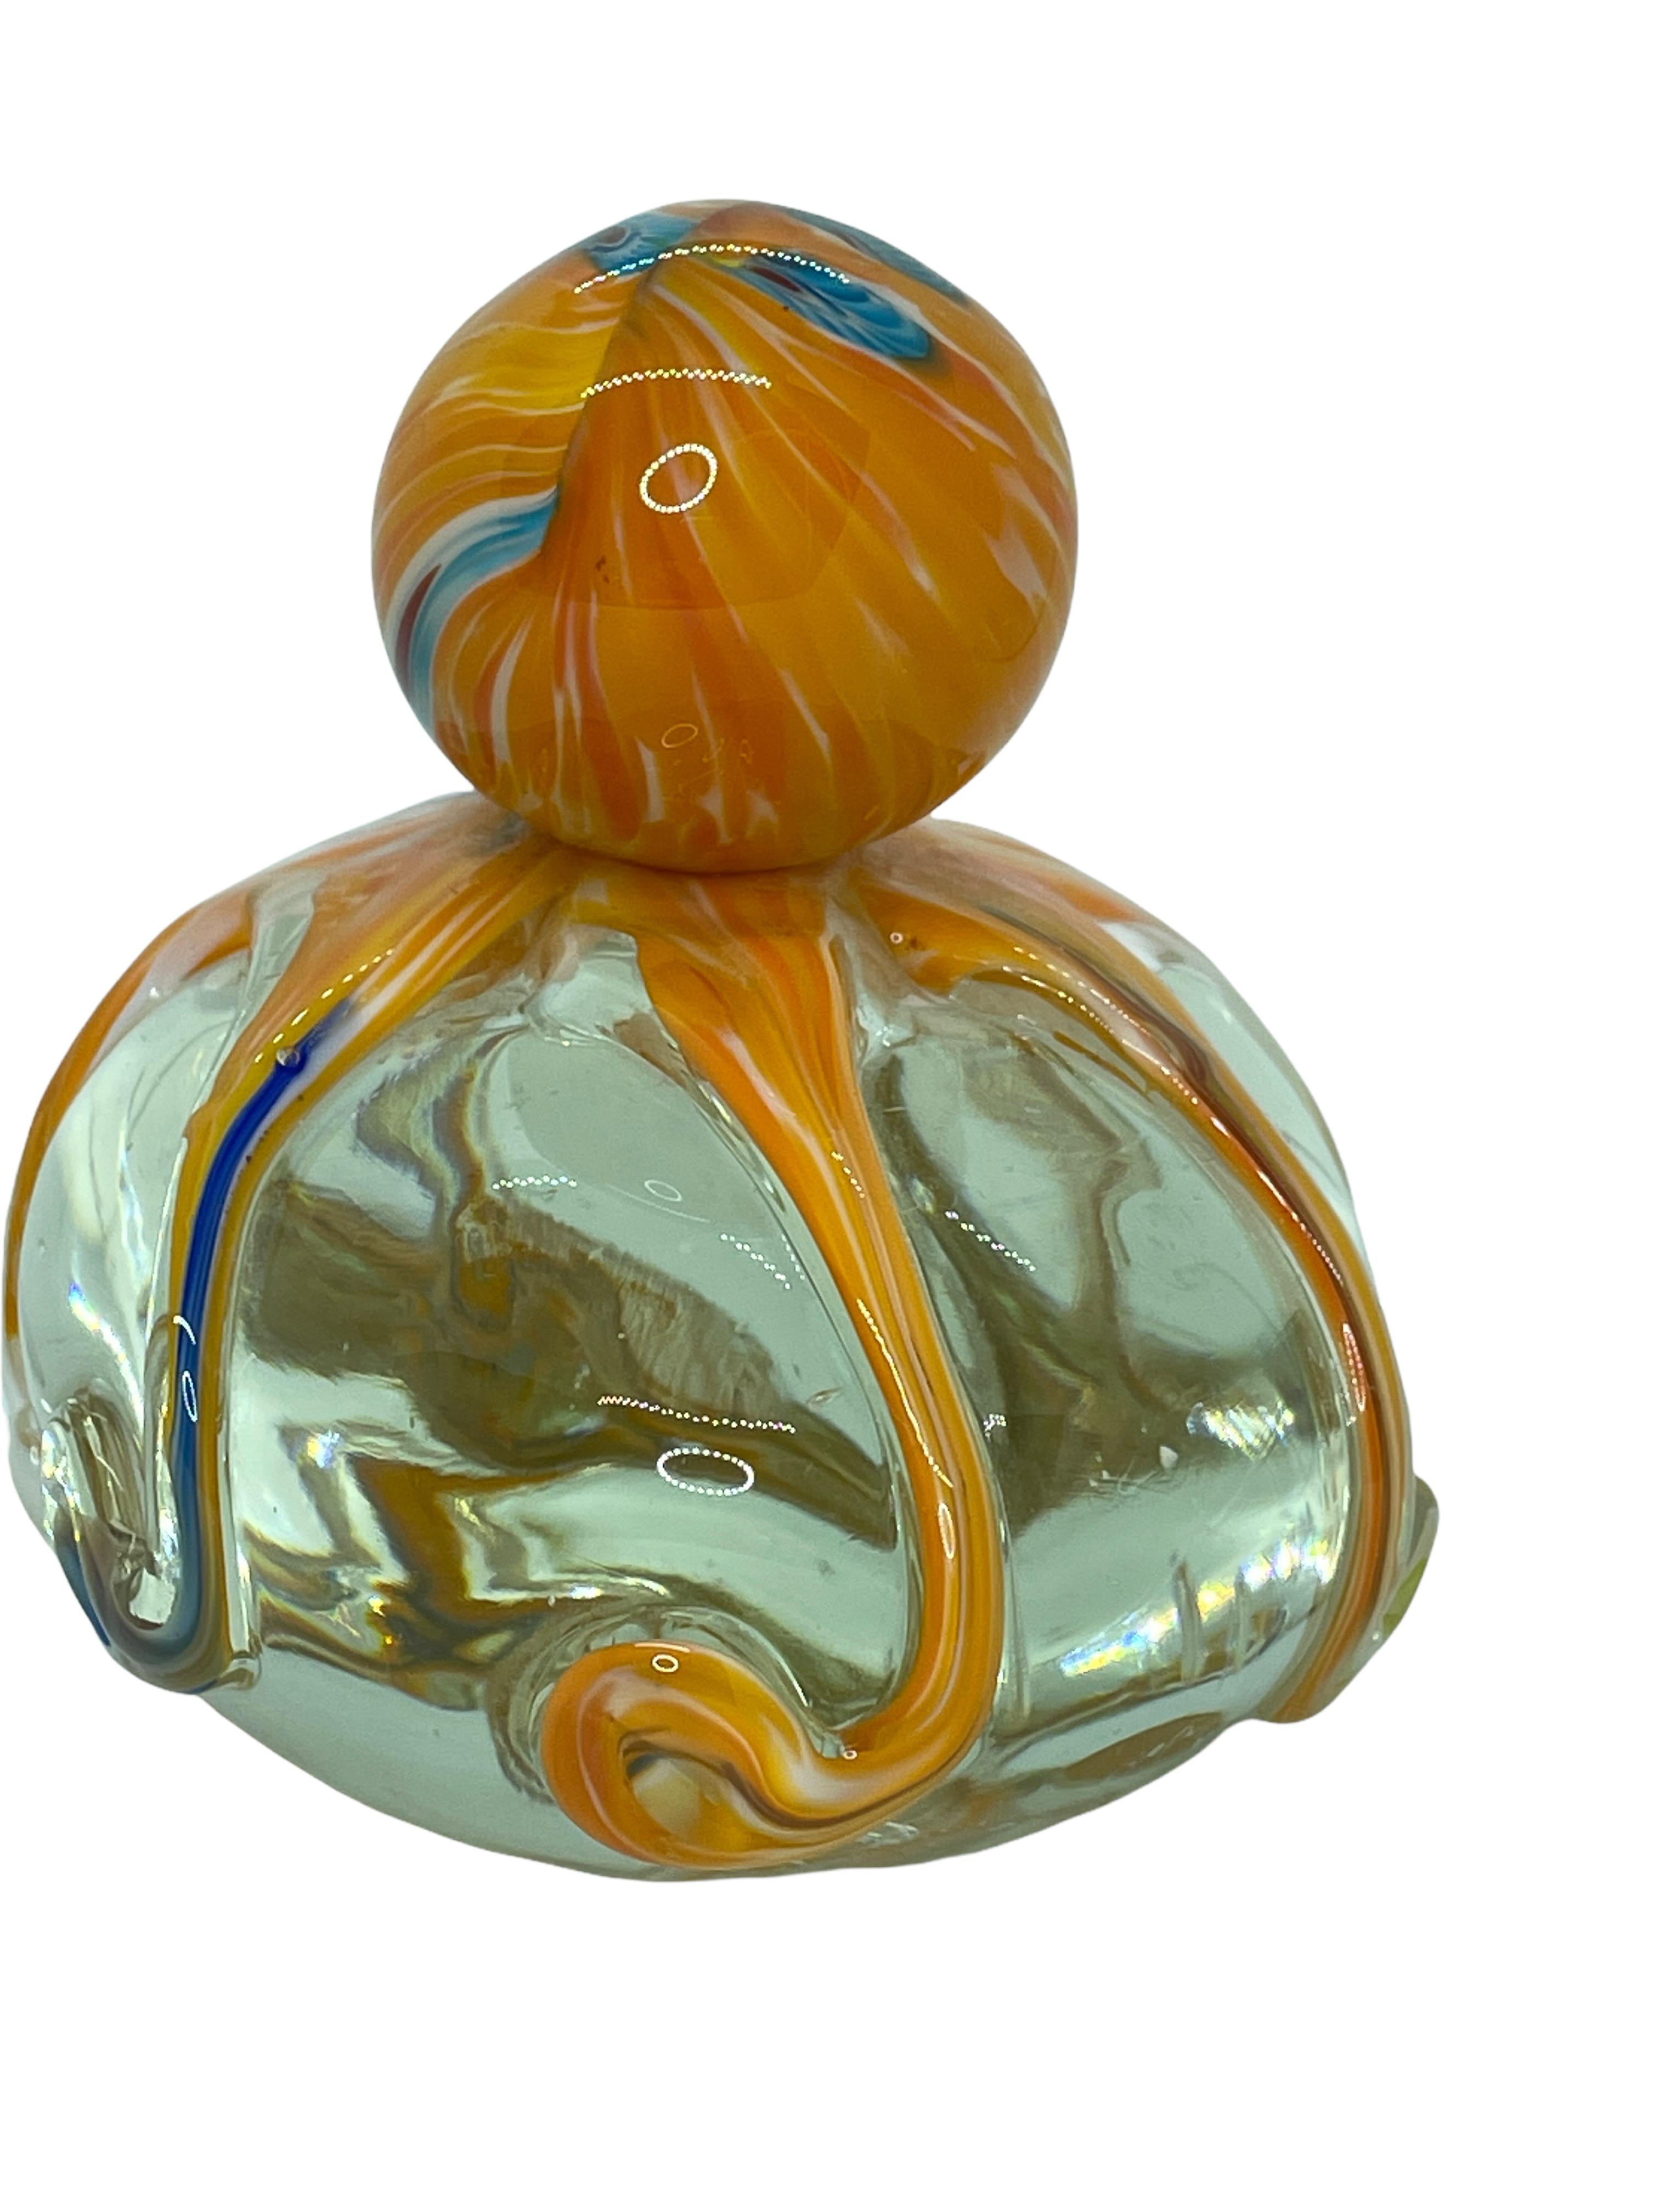 Hand-Crafted Gorgeous Murano Italian Art Glass Giant Octopuses Paperweight, Italy, 1980s